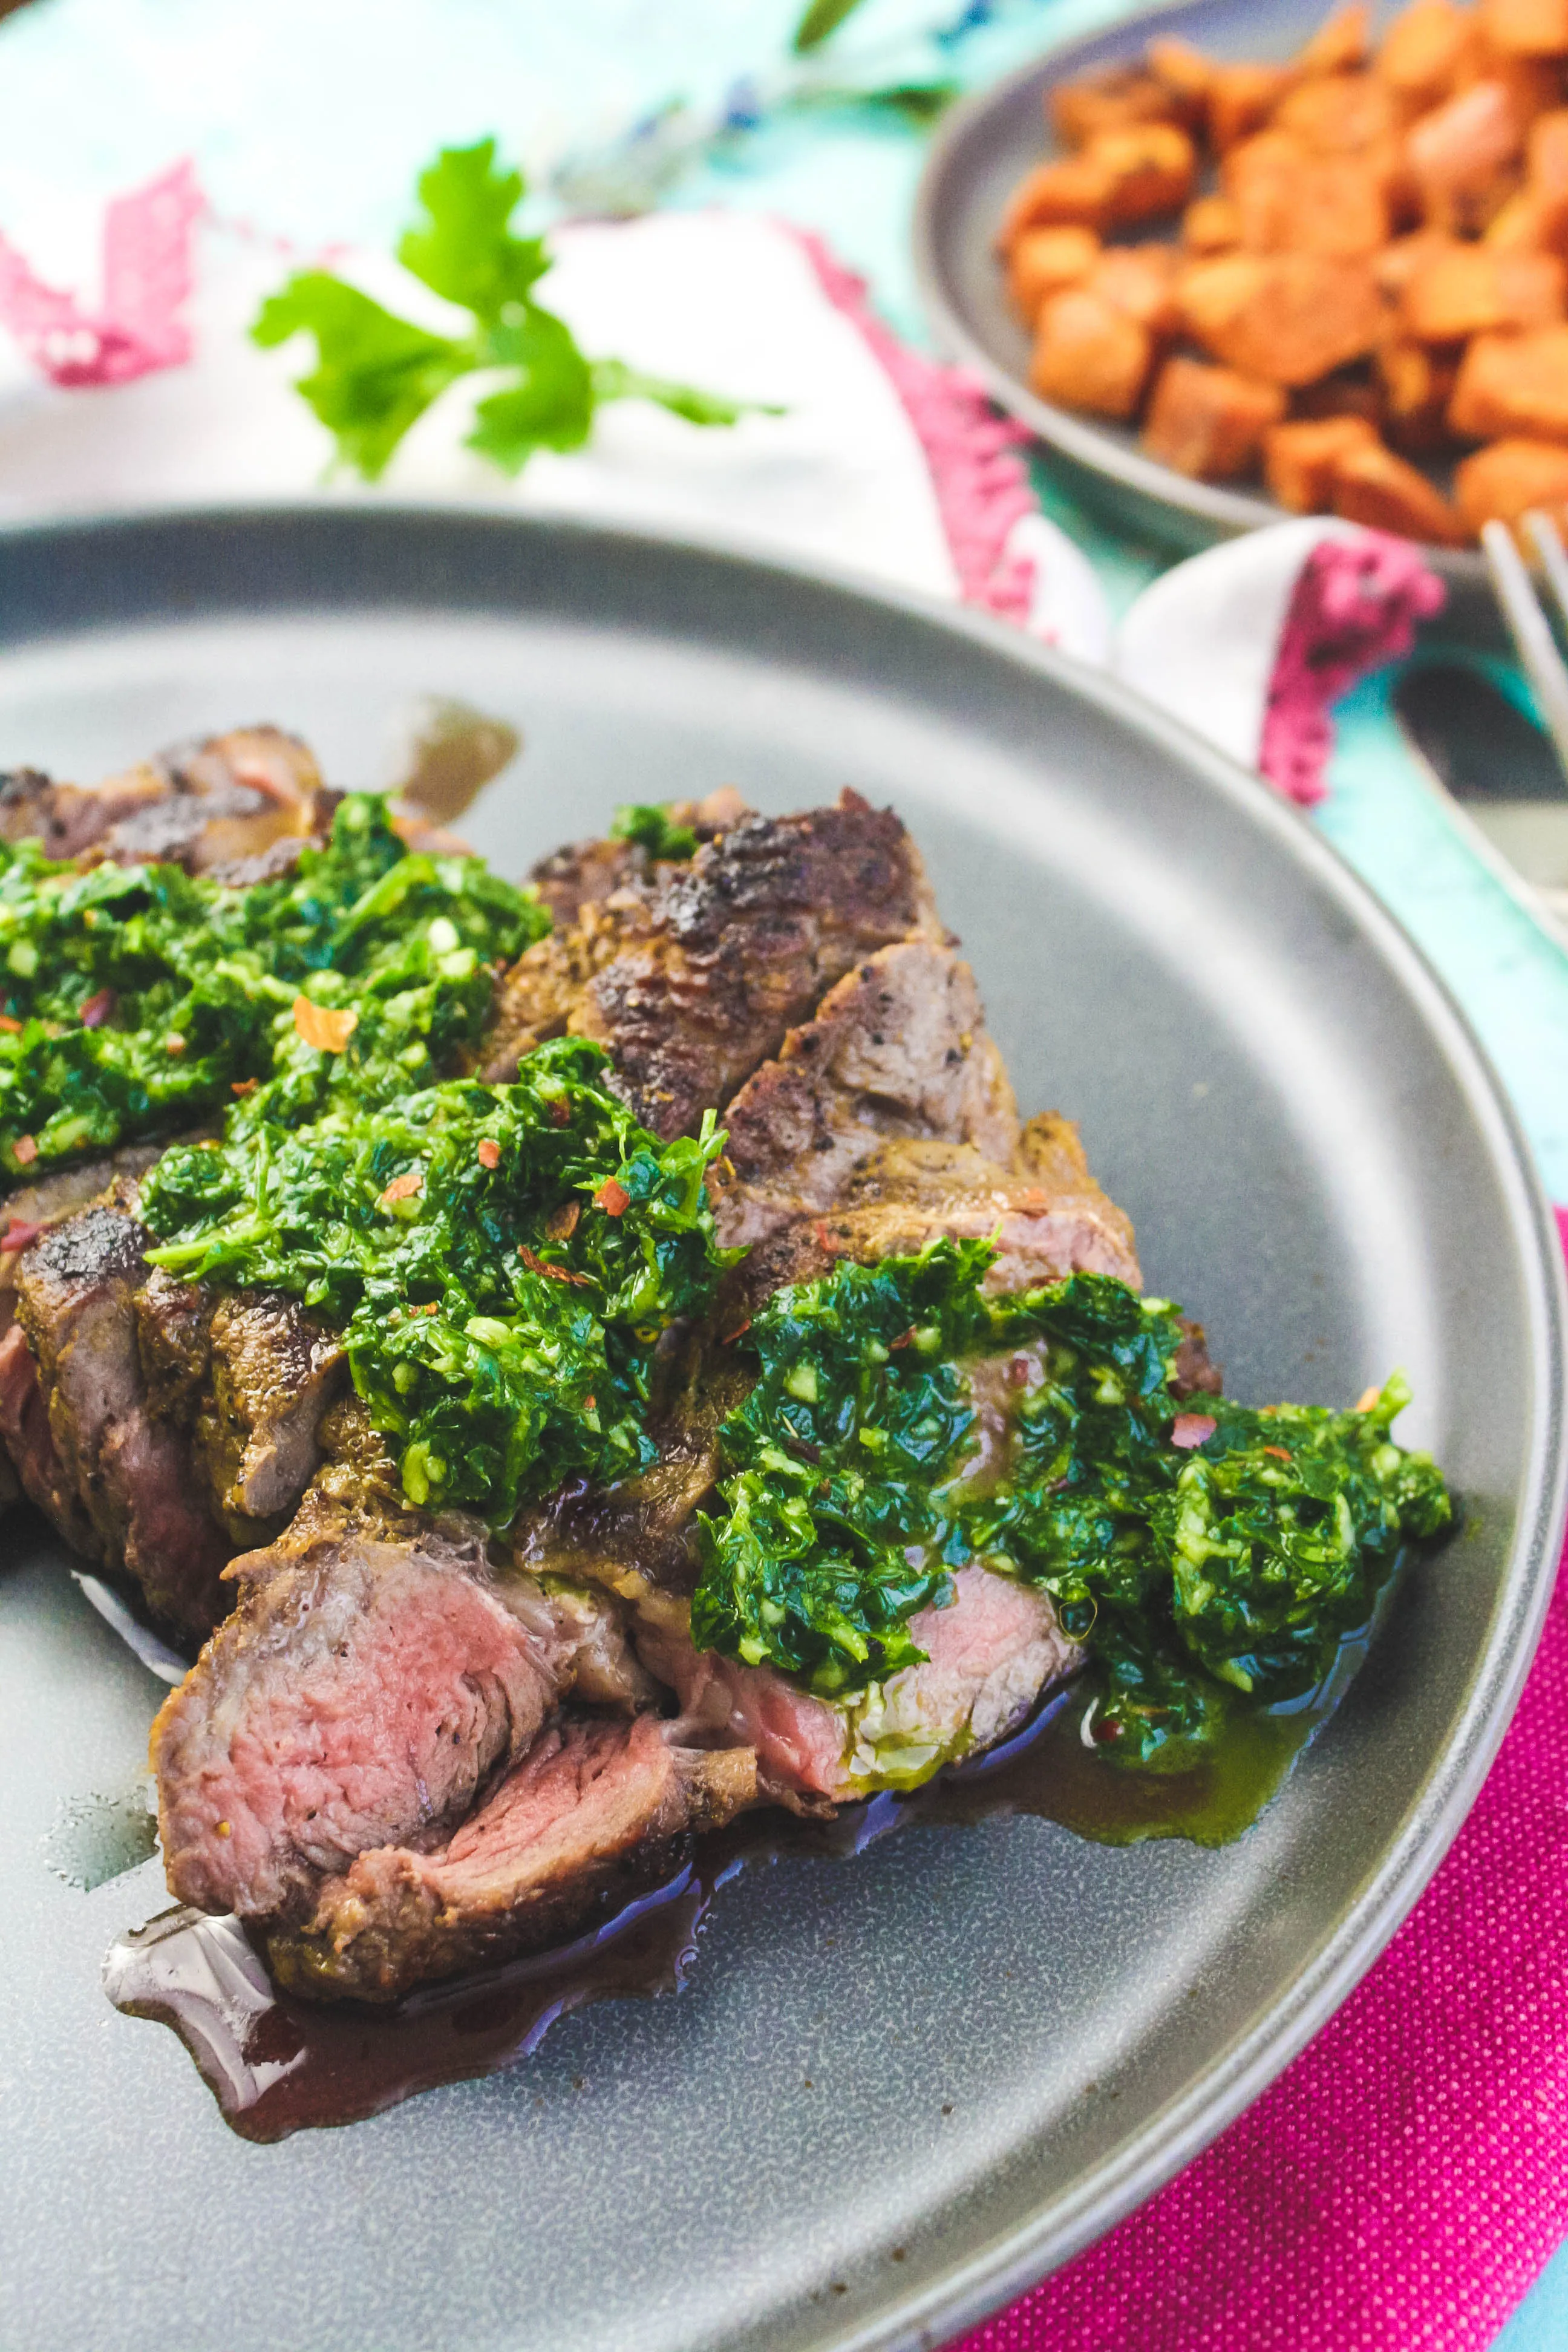 Skillet-Cooked NY Strip Steak with Chimichurri Sauce is a lovely main dish meal. Skillet-Cooked NY Strip Steak with Chimichurri Sauce is an easy-to-make main dish that will delight!